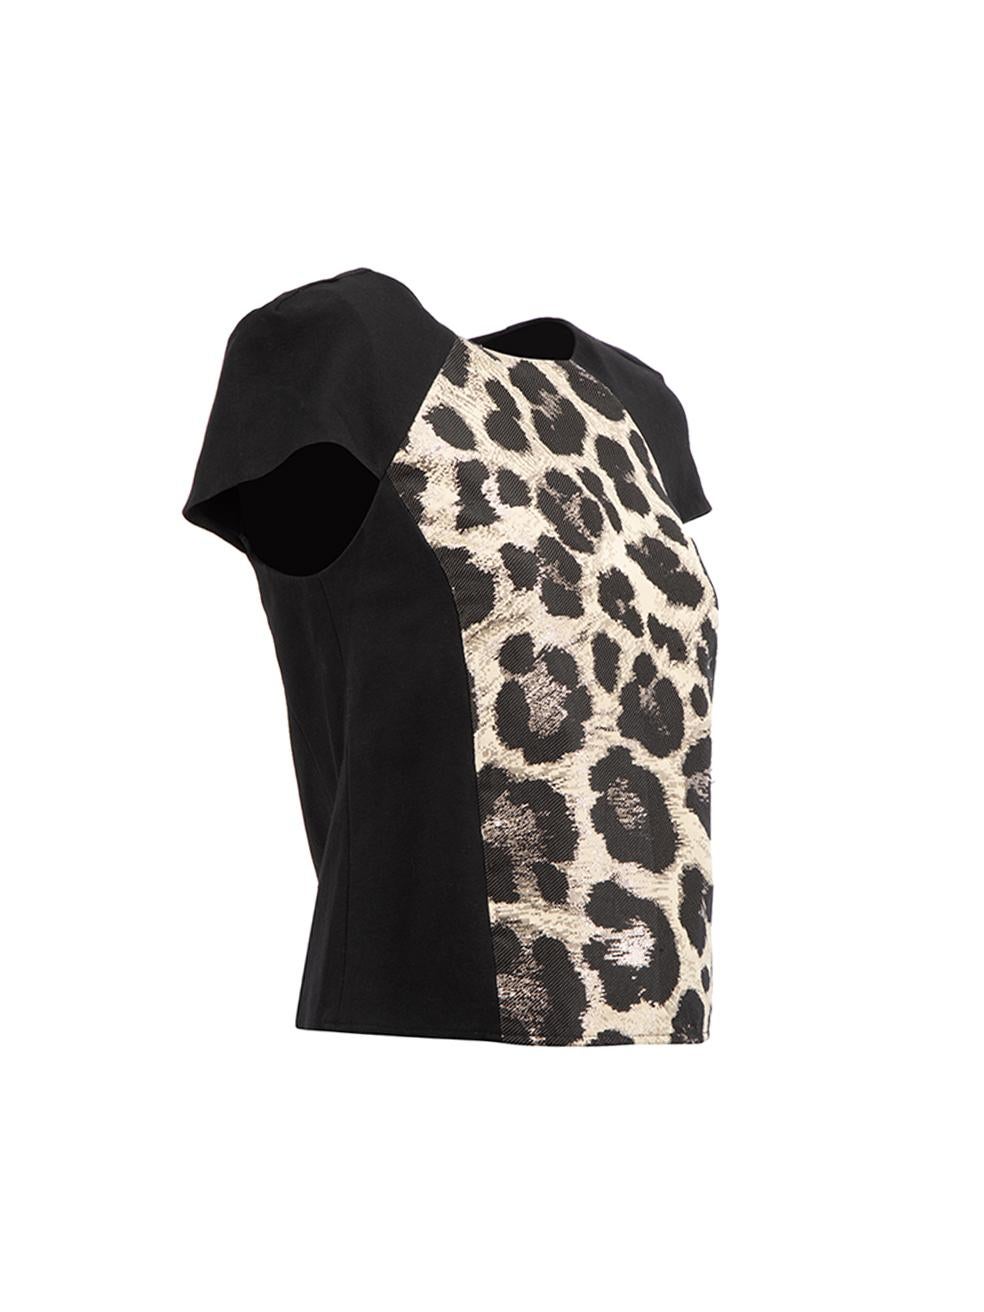 CONDITION is Very good. Minimal wear to top is evident. There are a few pulls to thread at the front of this used Tibi designer resale item. 



Details


Black

Polyester

Cap sleeves top

Leopard print panelled

Round neckline

Back zip closure